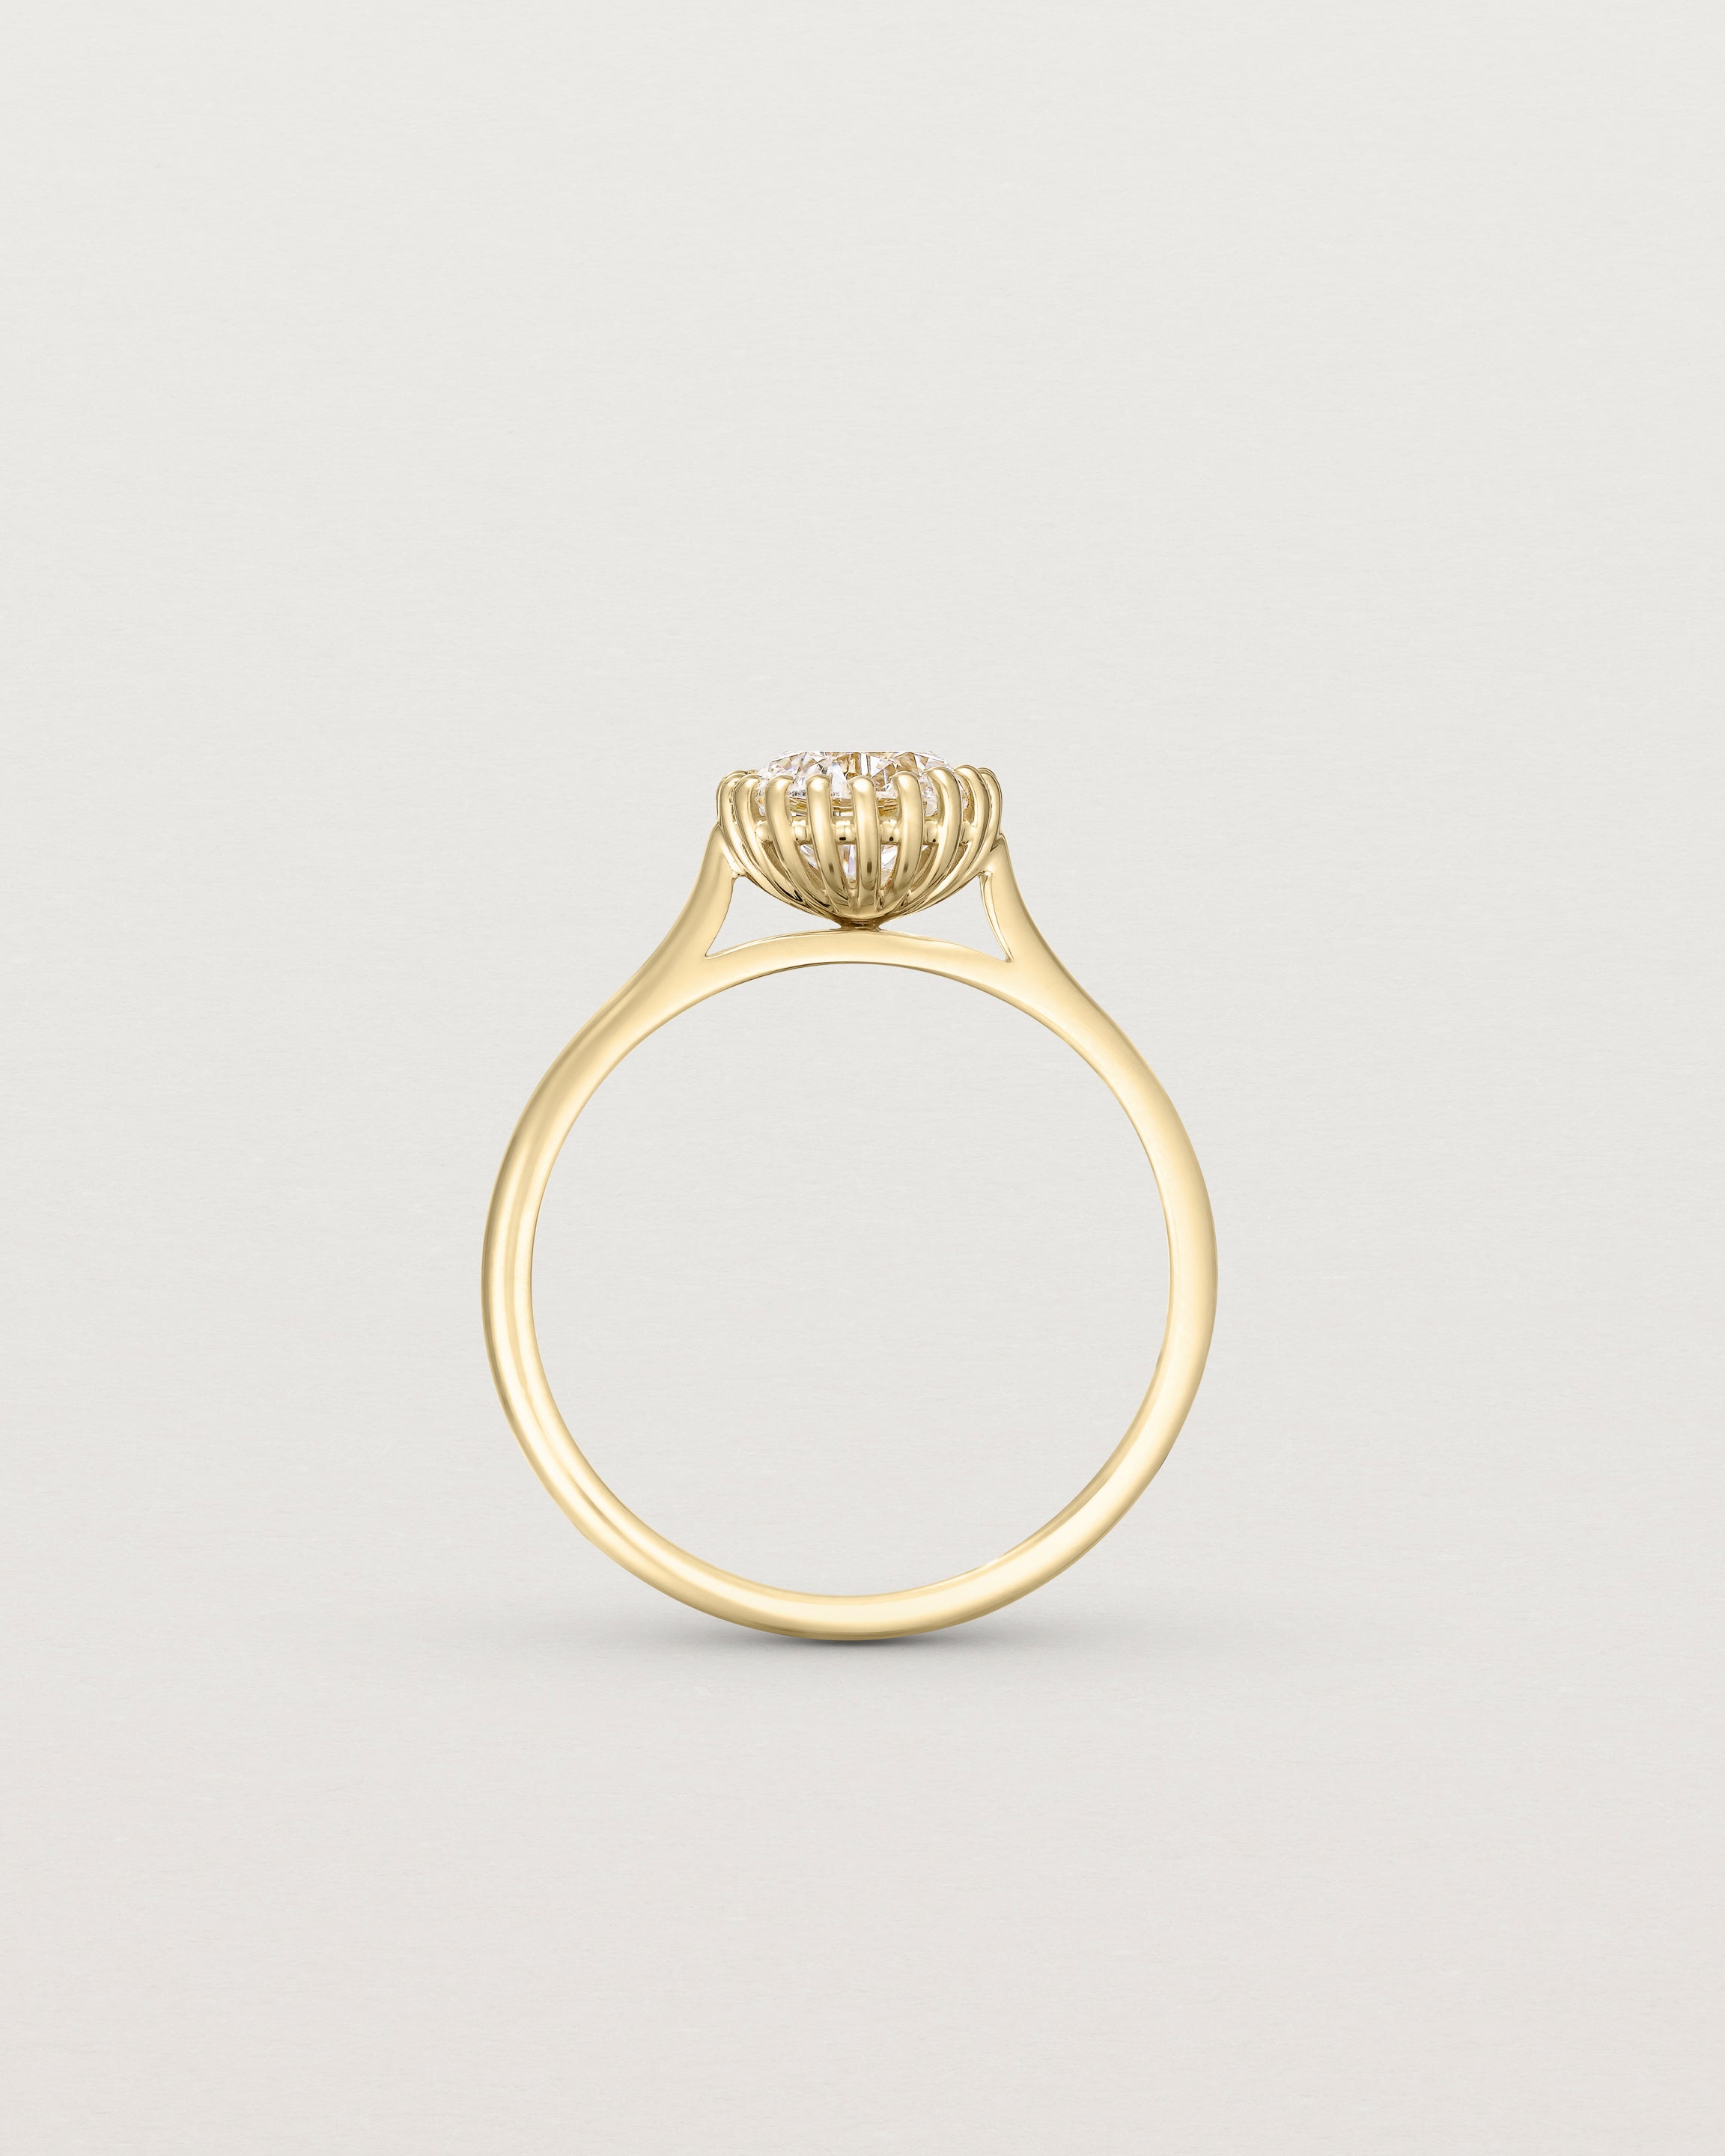 Standing view of the Meroë Round Solitaire | Laboratory Grown Diamond in yellow gold